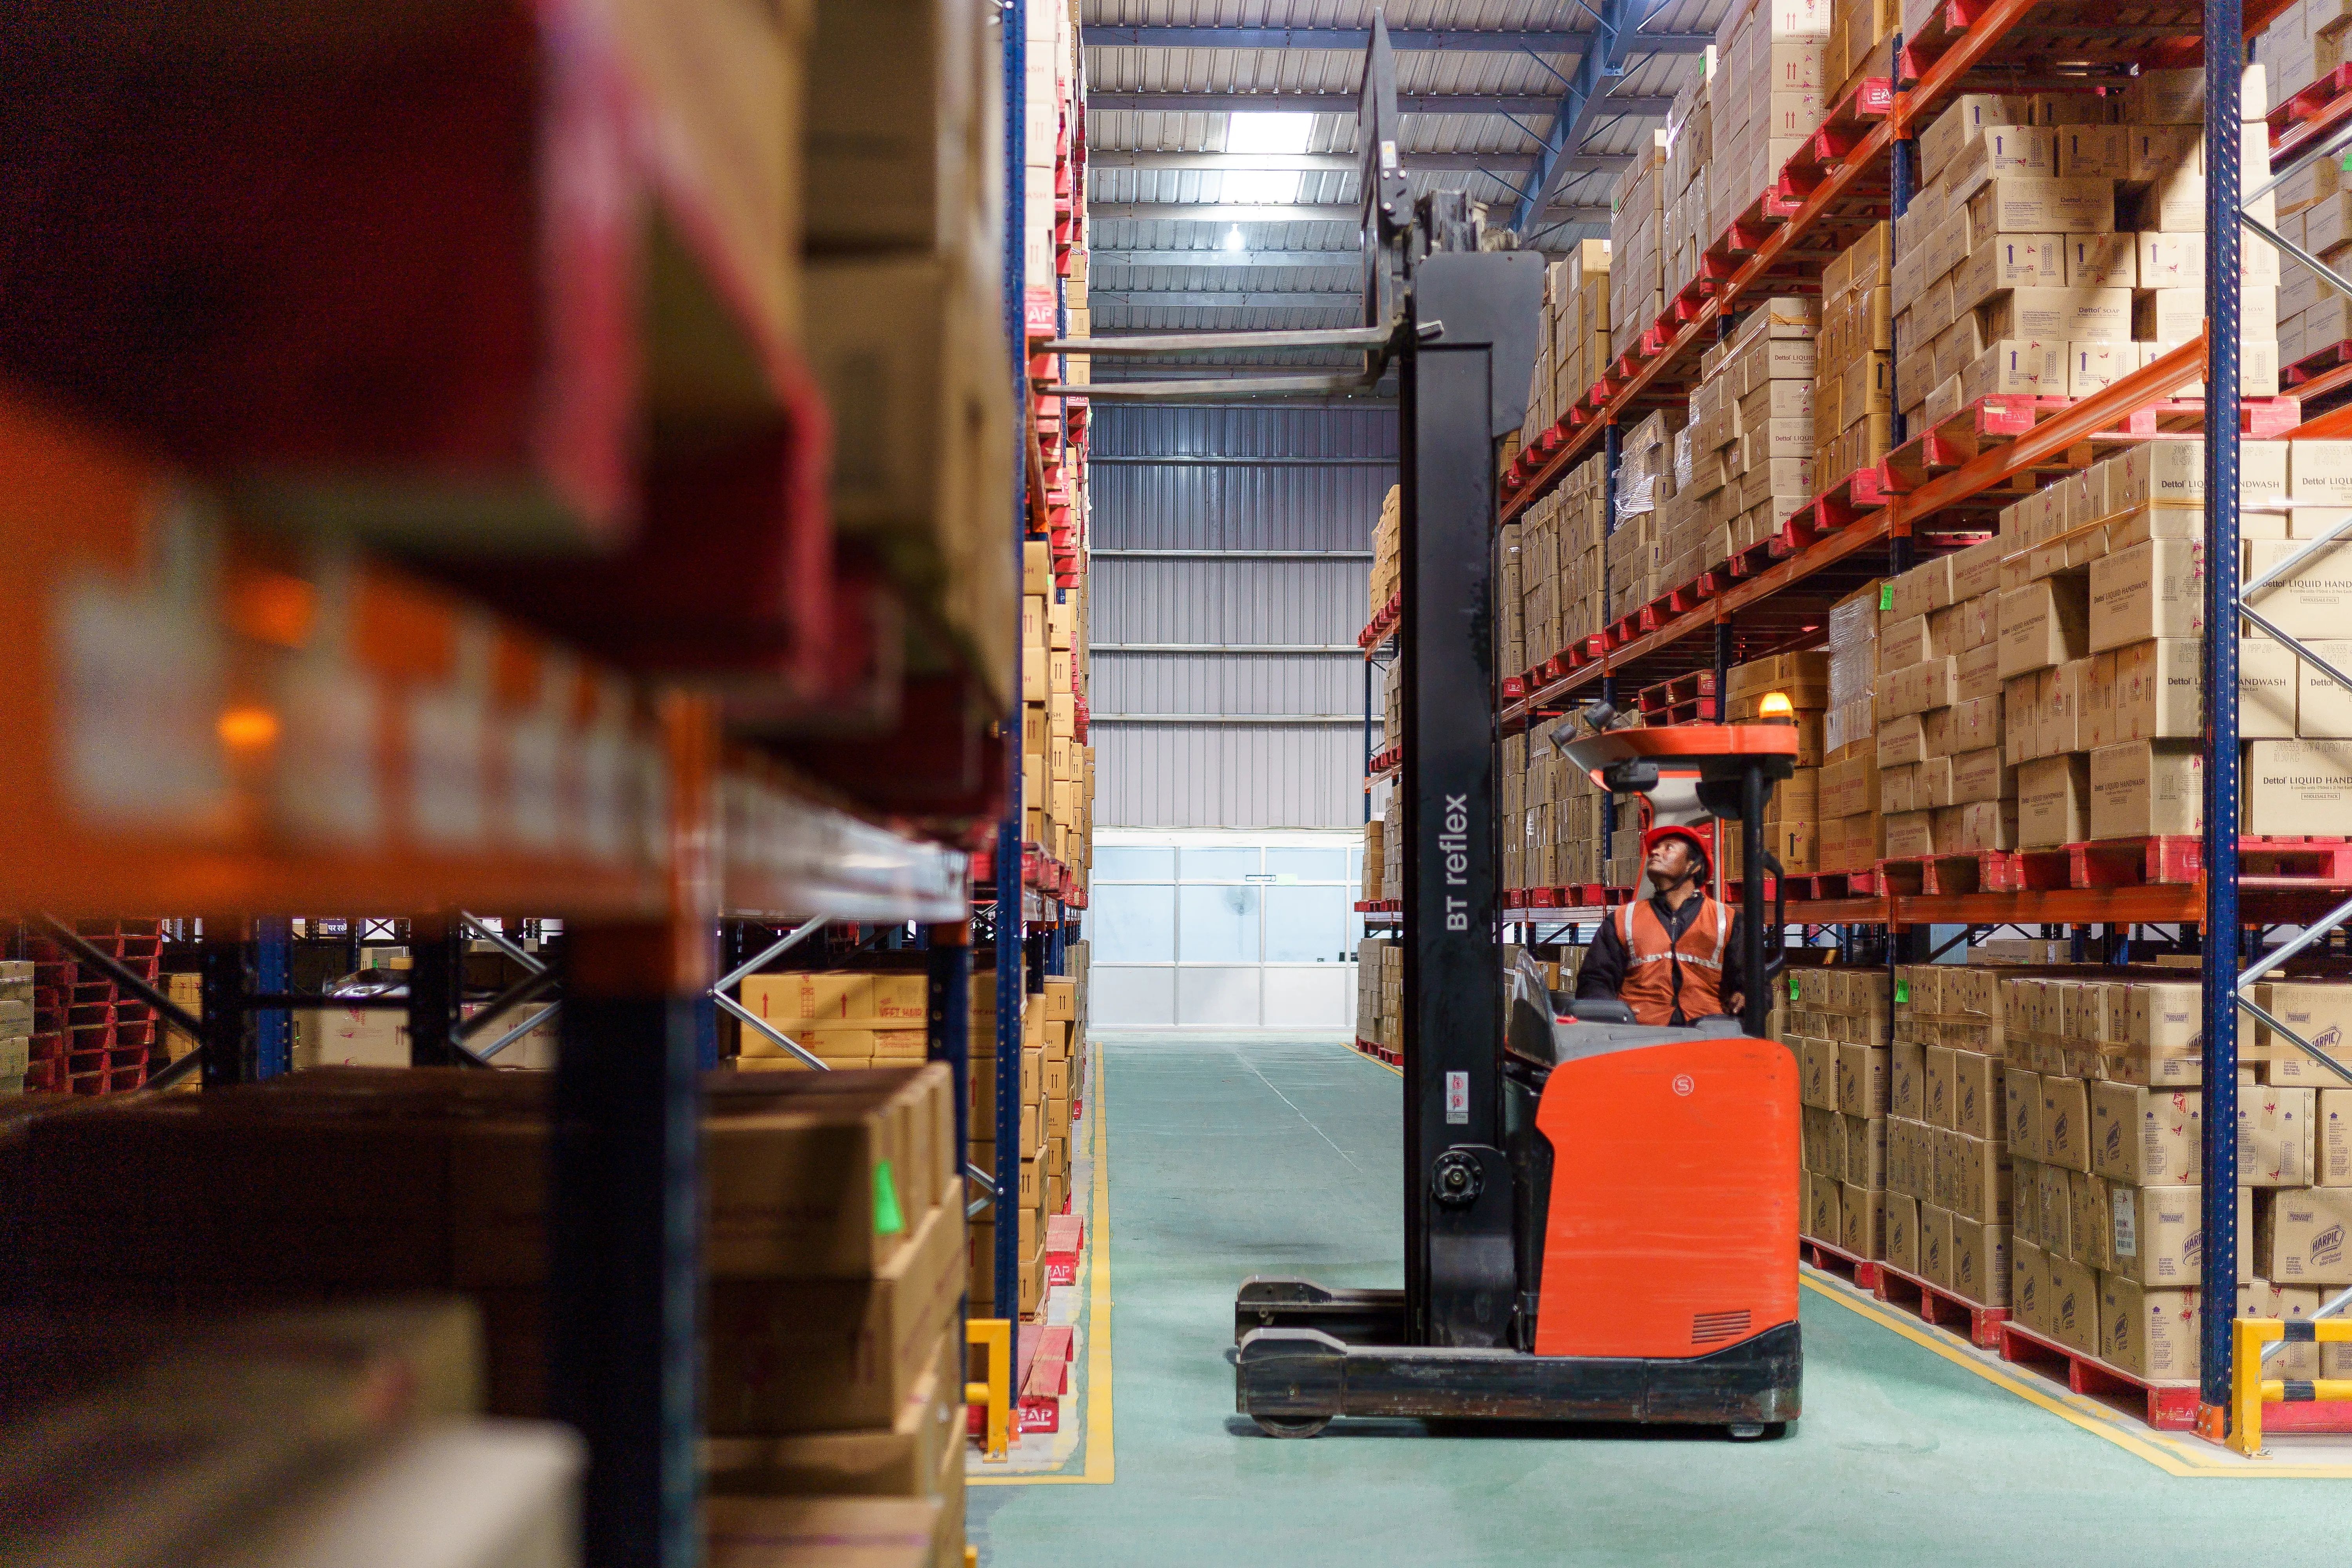 Reducing the effective logistics costs of products by 8% for an FMCG giant